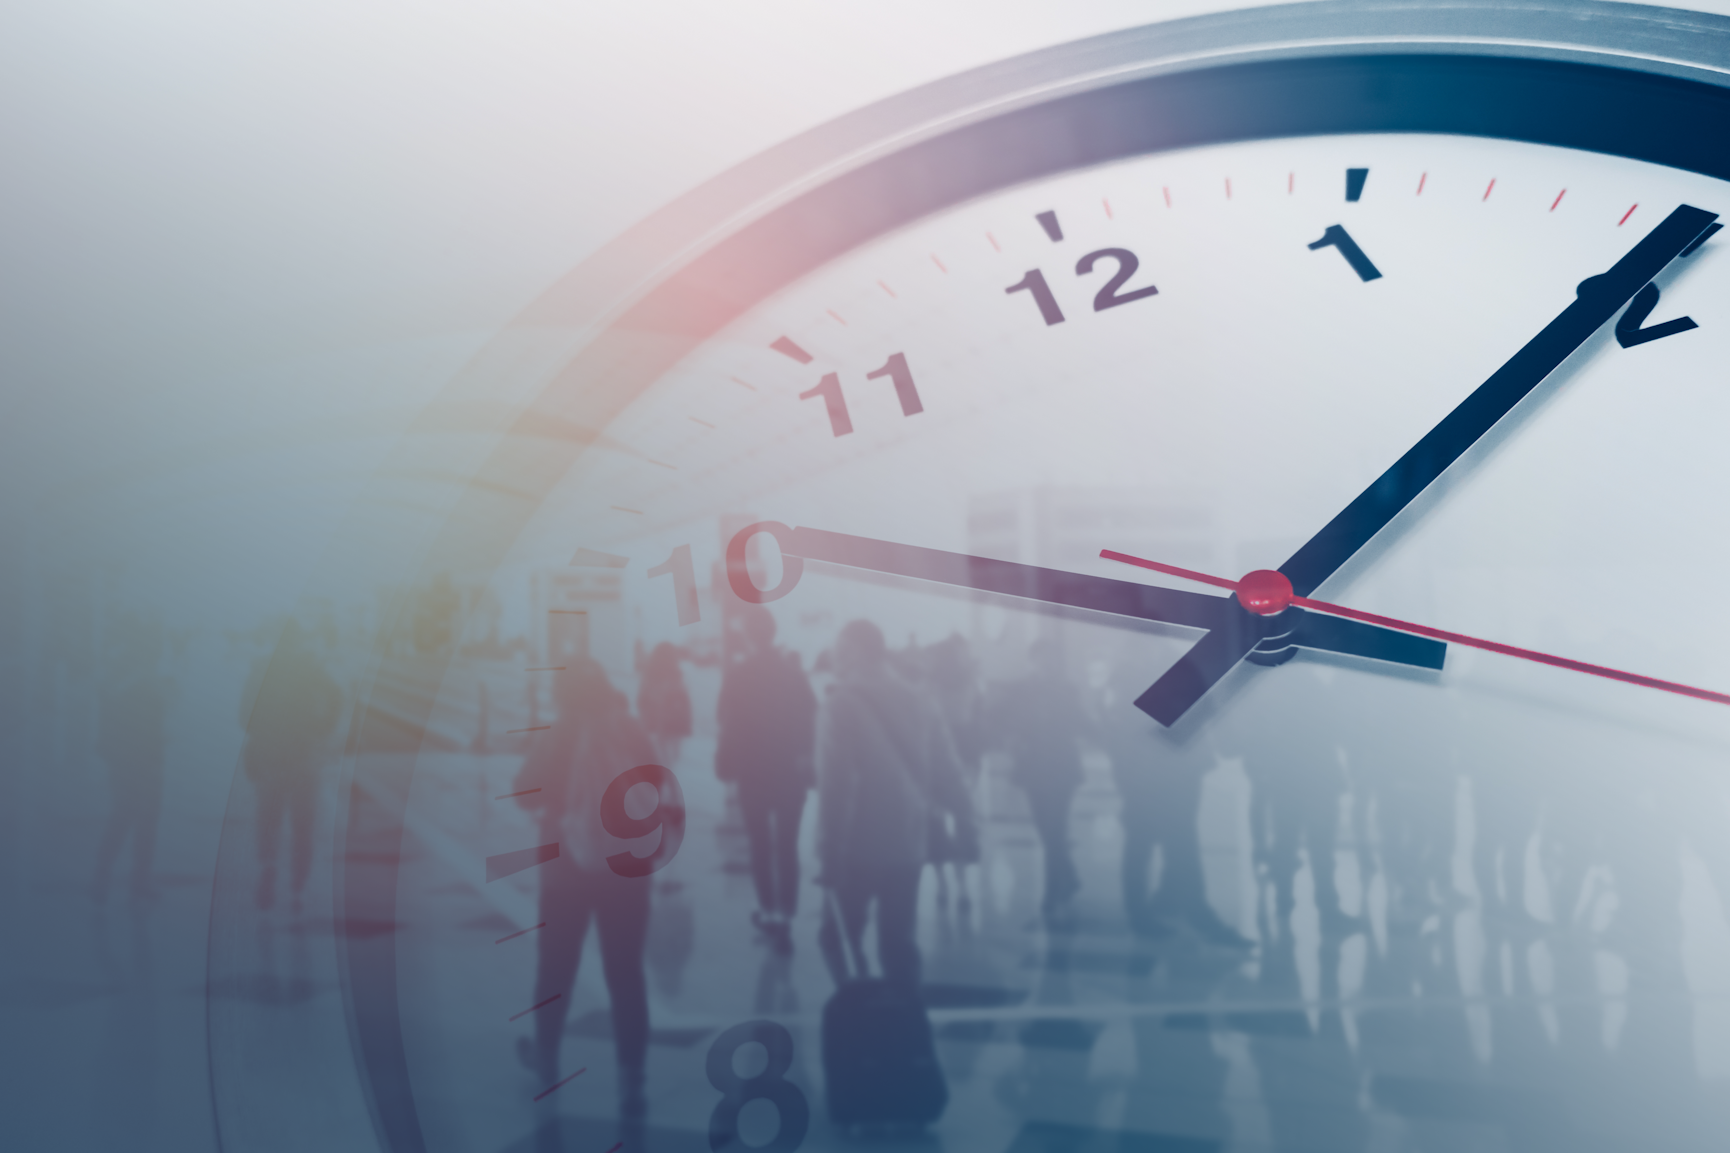 Abstract image of a clock and people walking through a crowed place